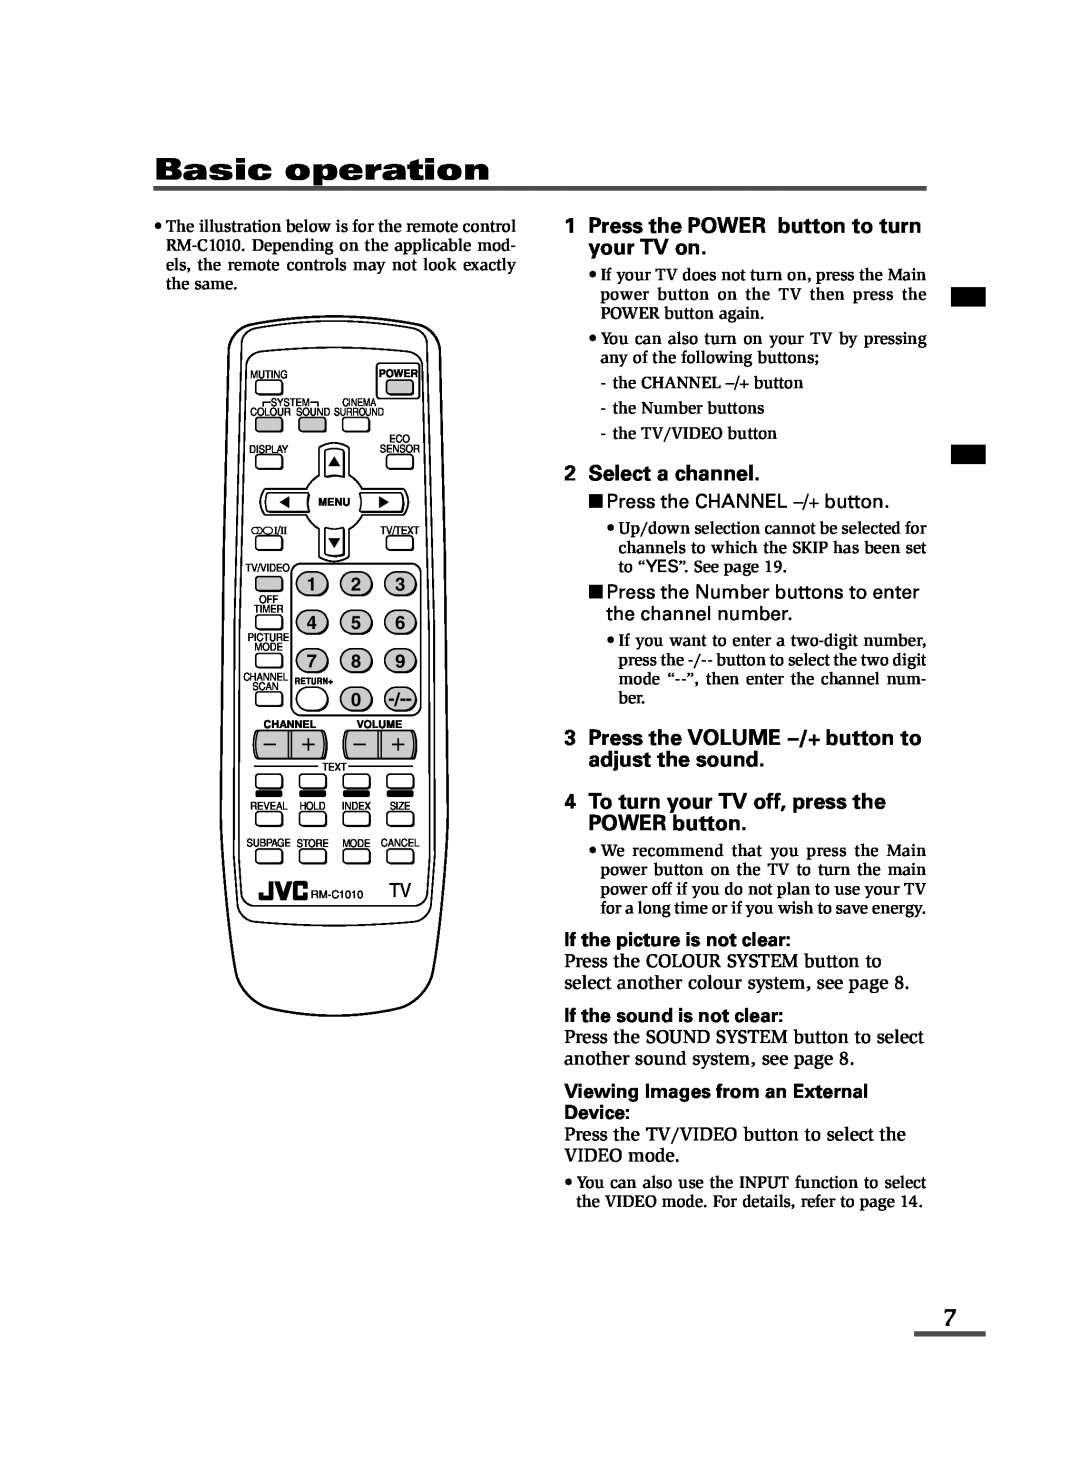 JVC specifications Basic operation, Press the POWER button to turn your TV on, Select a channel 